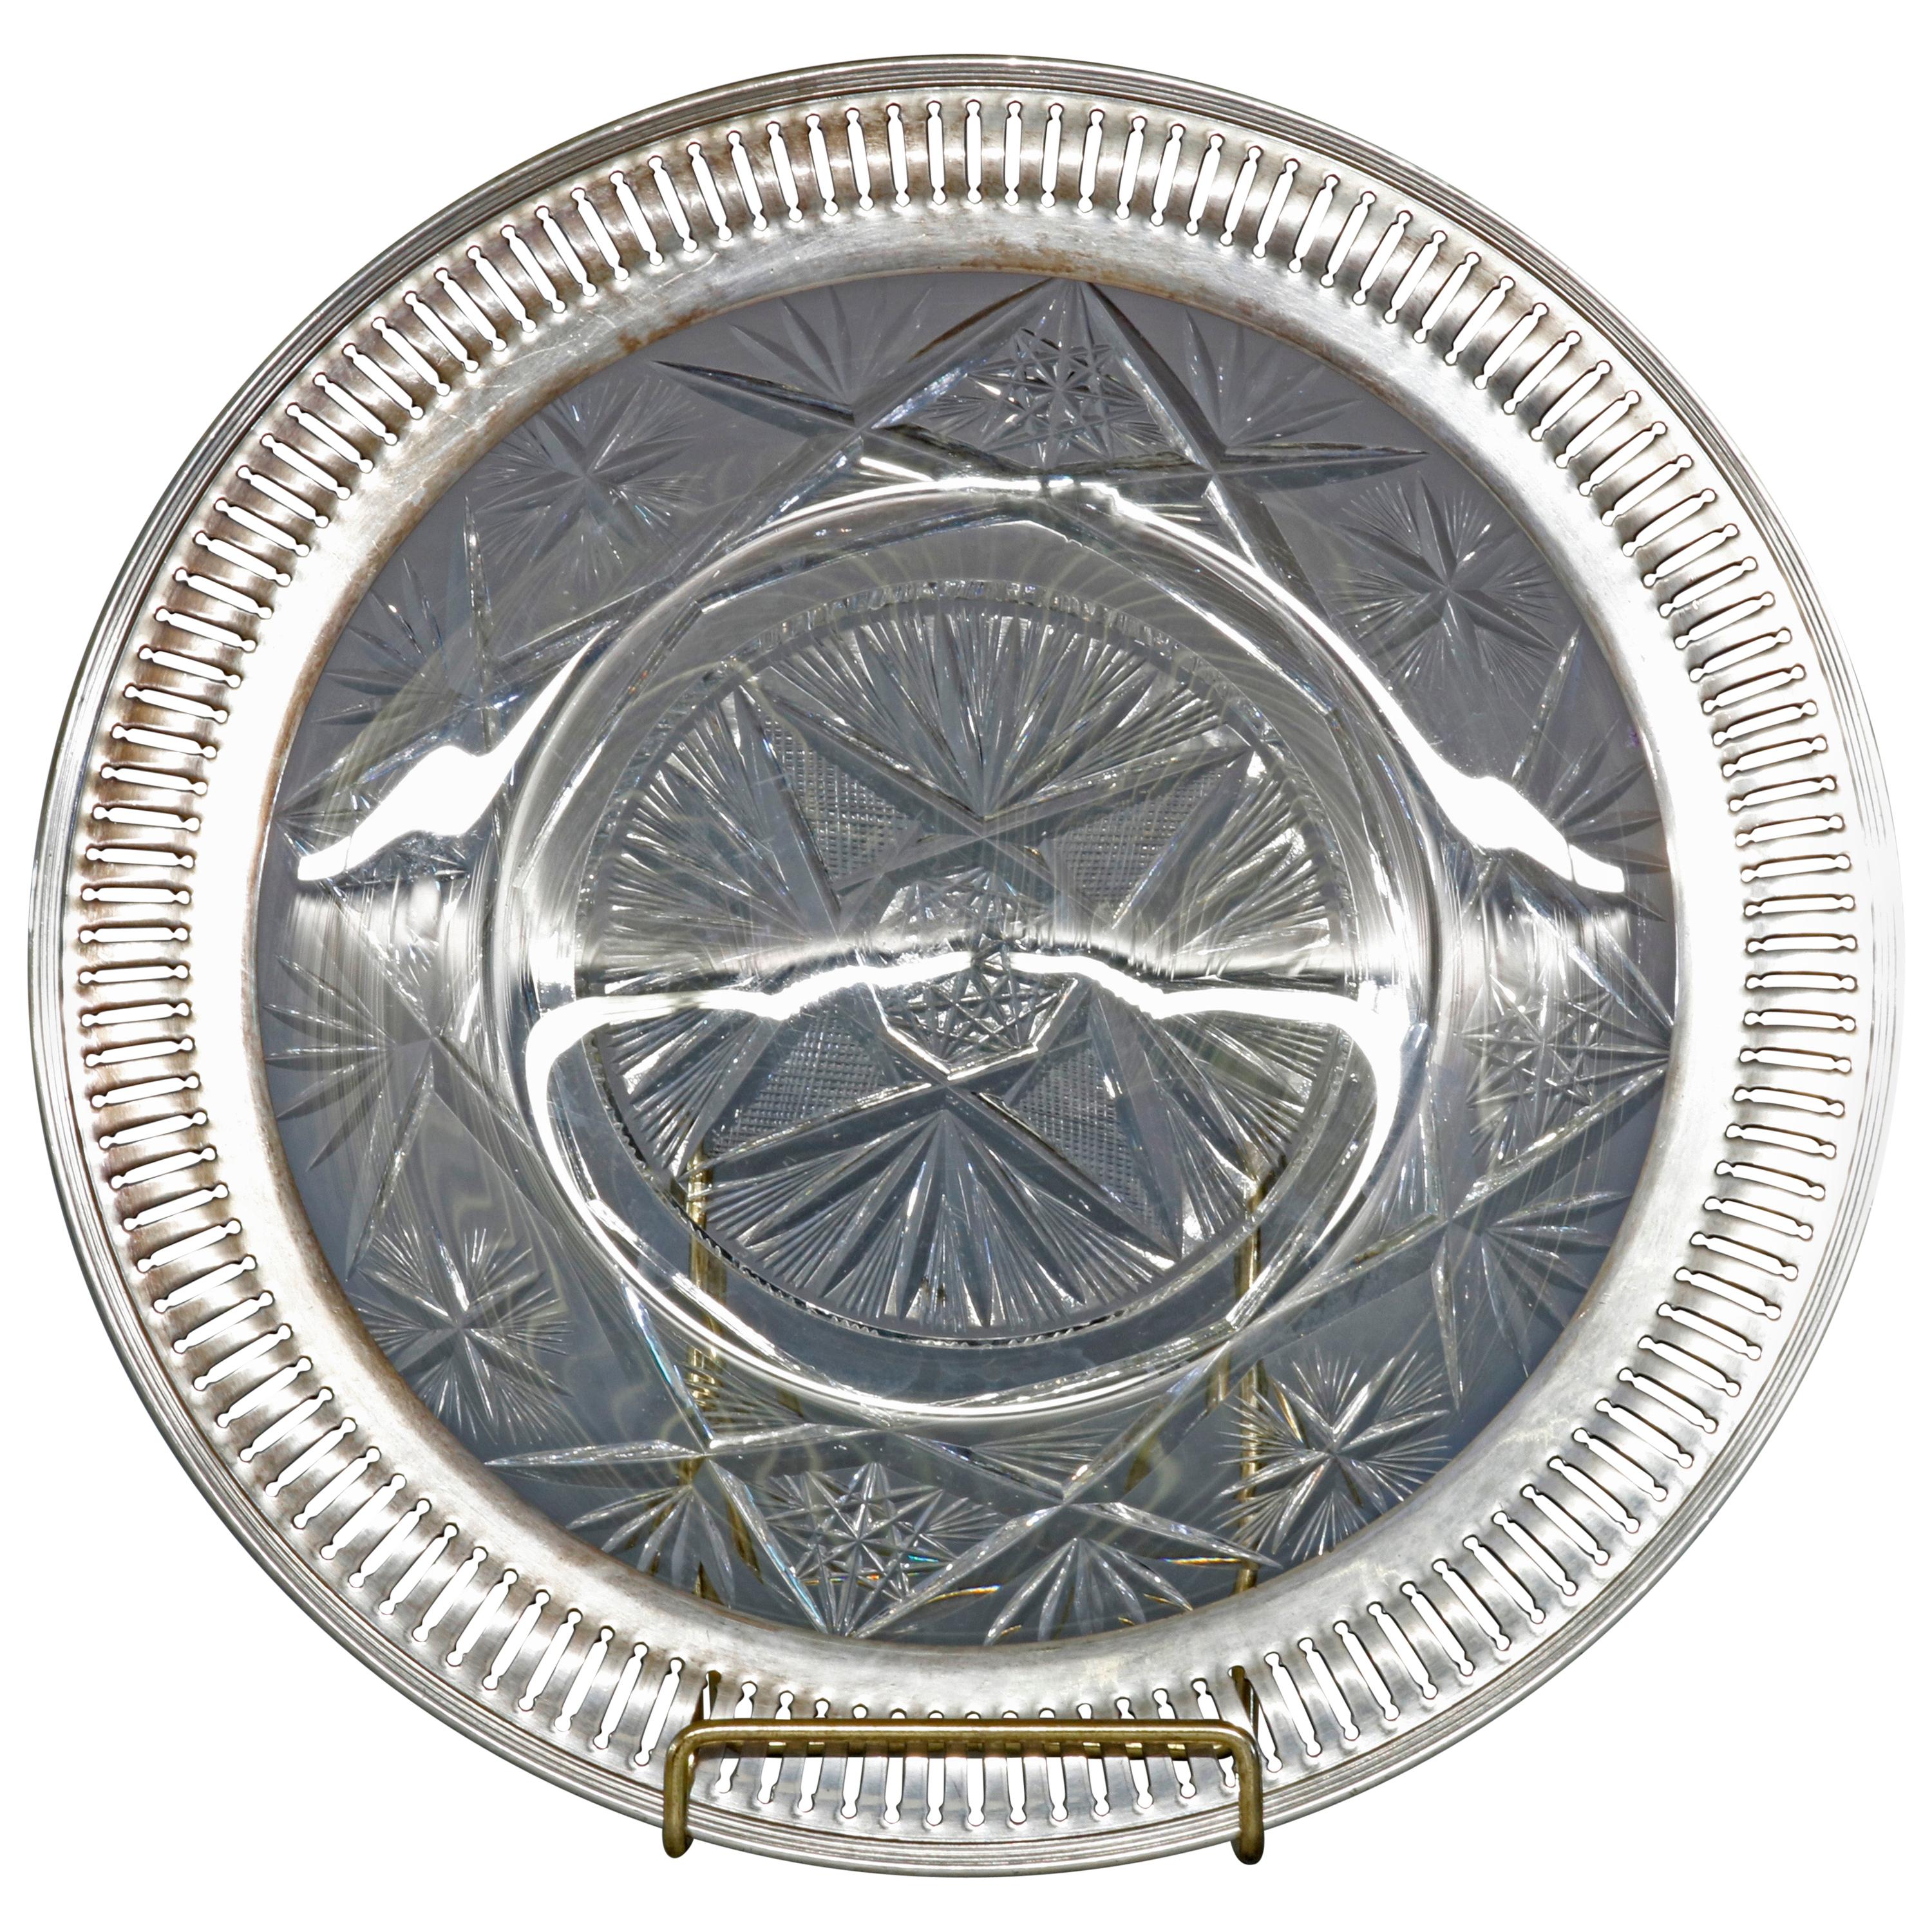 Vintage Cut Glass and Sterling Silver Serving Tray, circa 1940